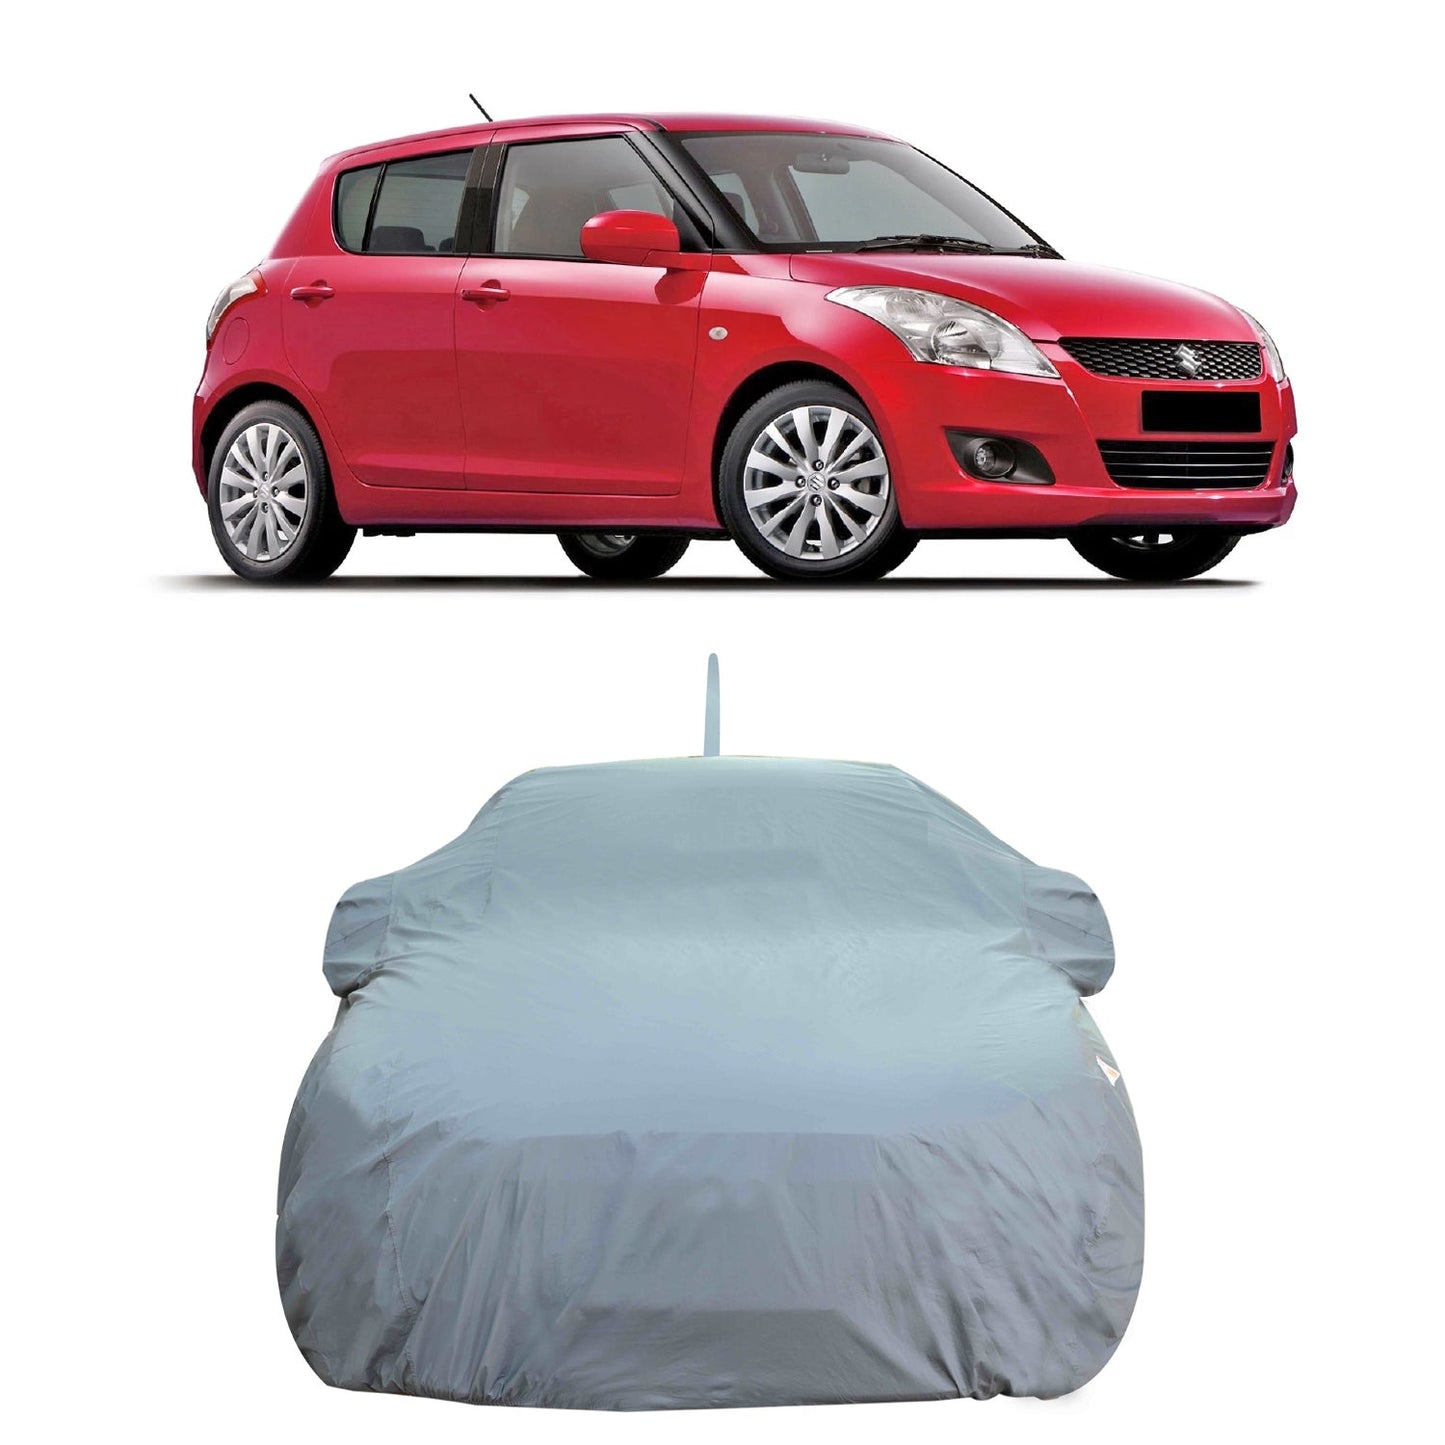 Oshotto Dark Grey 100% Anti Reflective, dustproof and Water Proof Car Body Cover with Mirror Pockets For Maruti Suzuki Swift 2018-2023 (with Antenna Pockets)